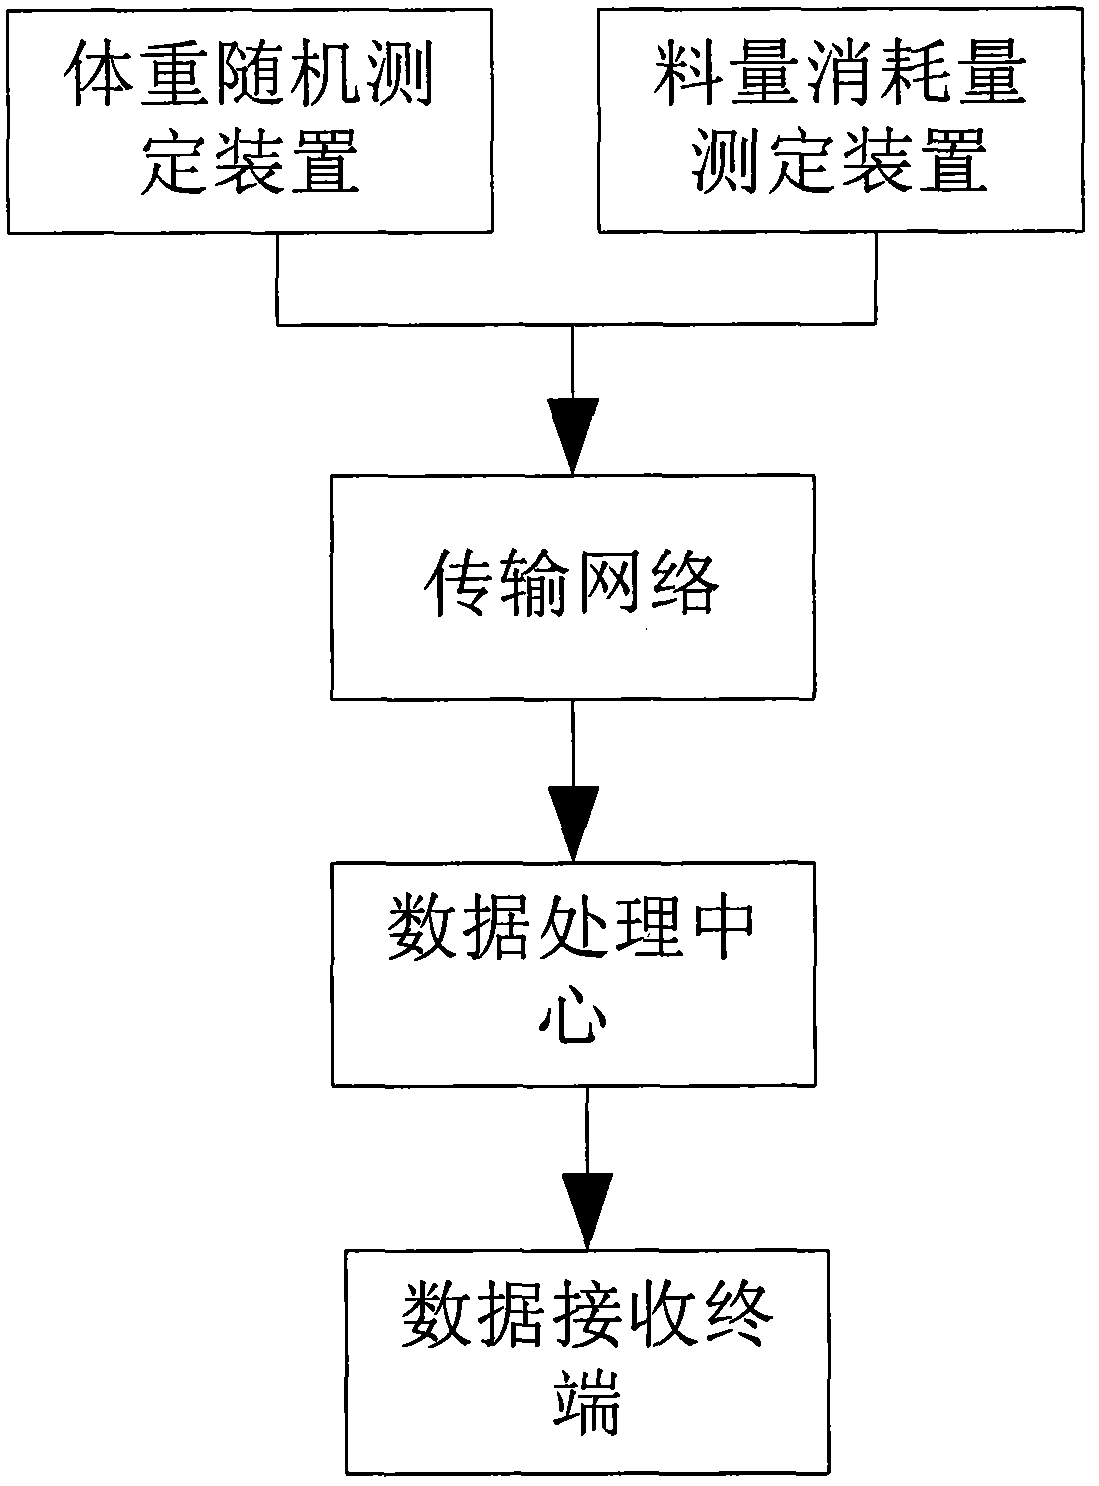 An intelligent intensive livestock and poultry monitoring system and method